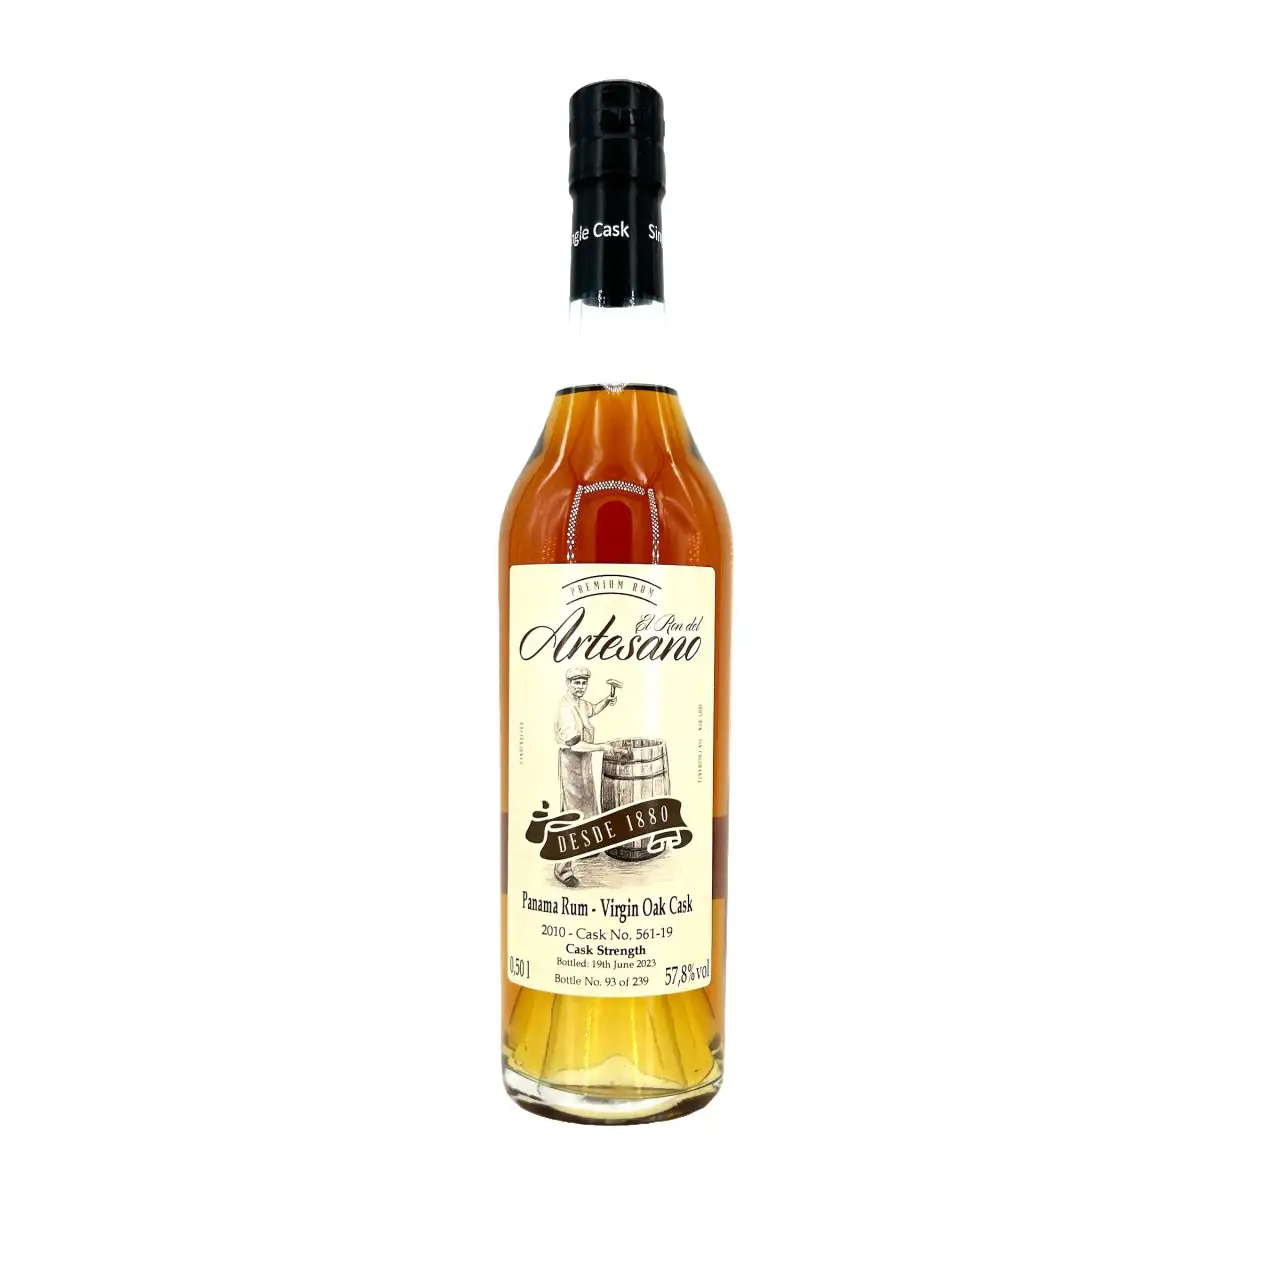 Image of the front of the bottle of the rum Panama Rum - Virgin Oak Cask